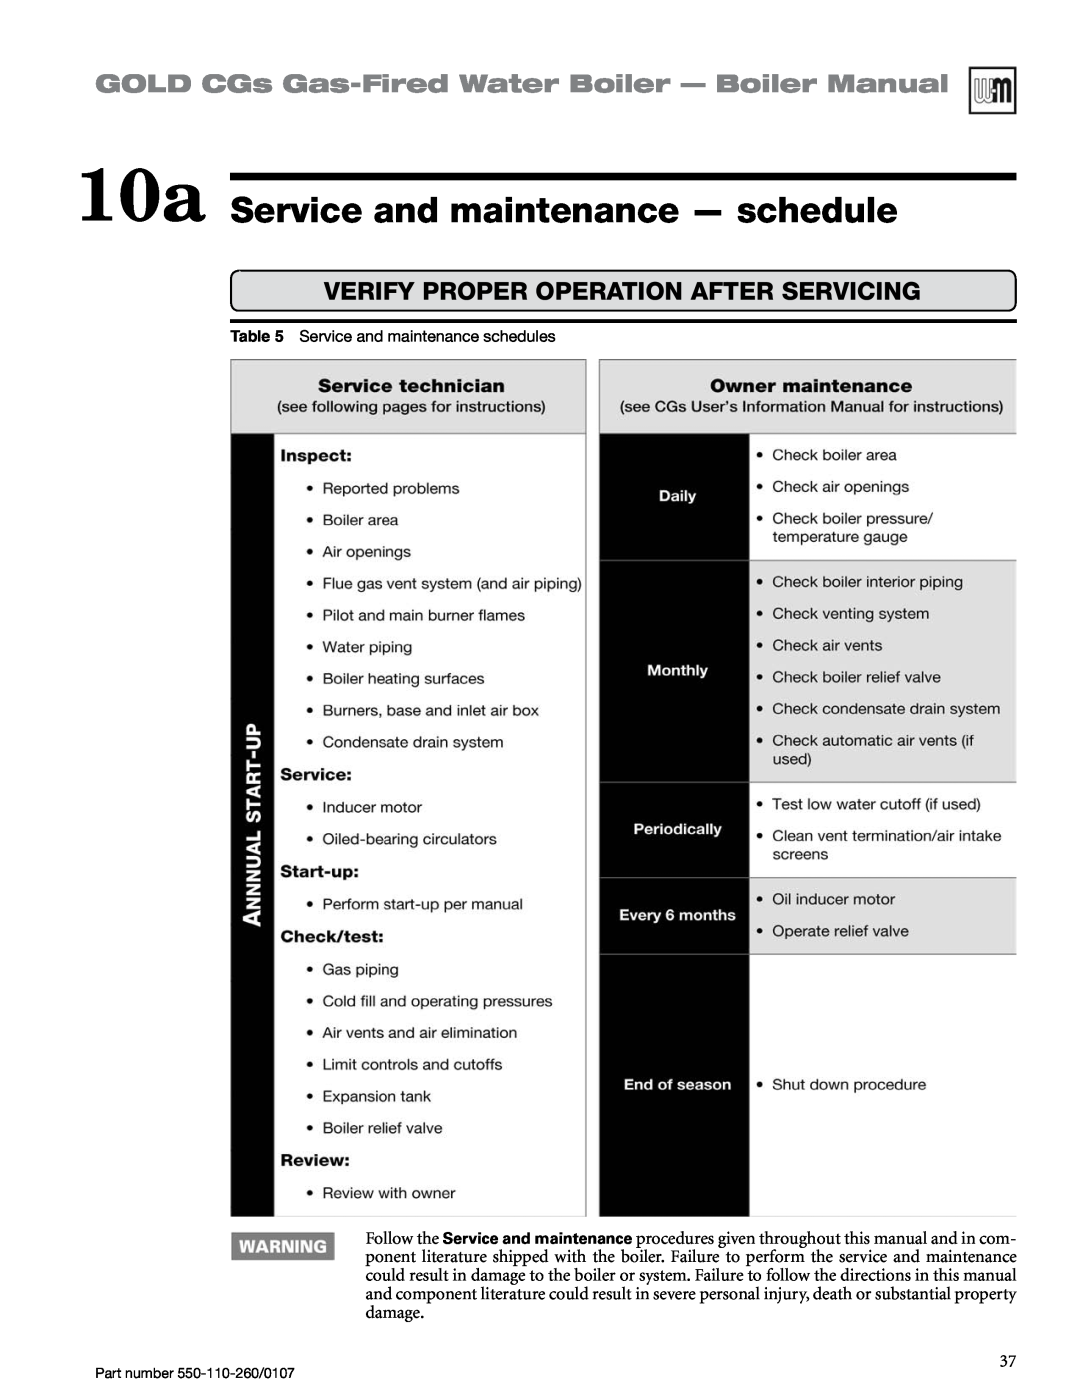 Weil-McLain 550-110-260/0107 manual 10a Service and maintenance - schedule, Verify Proper Operation After Servicing 